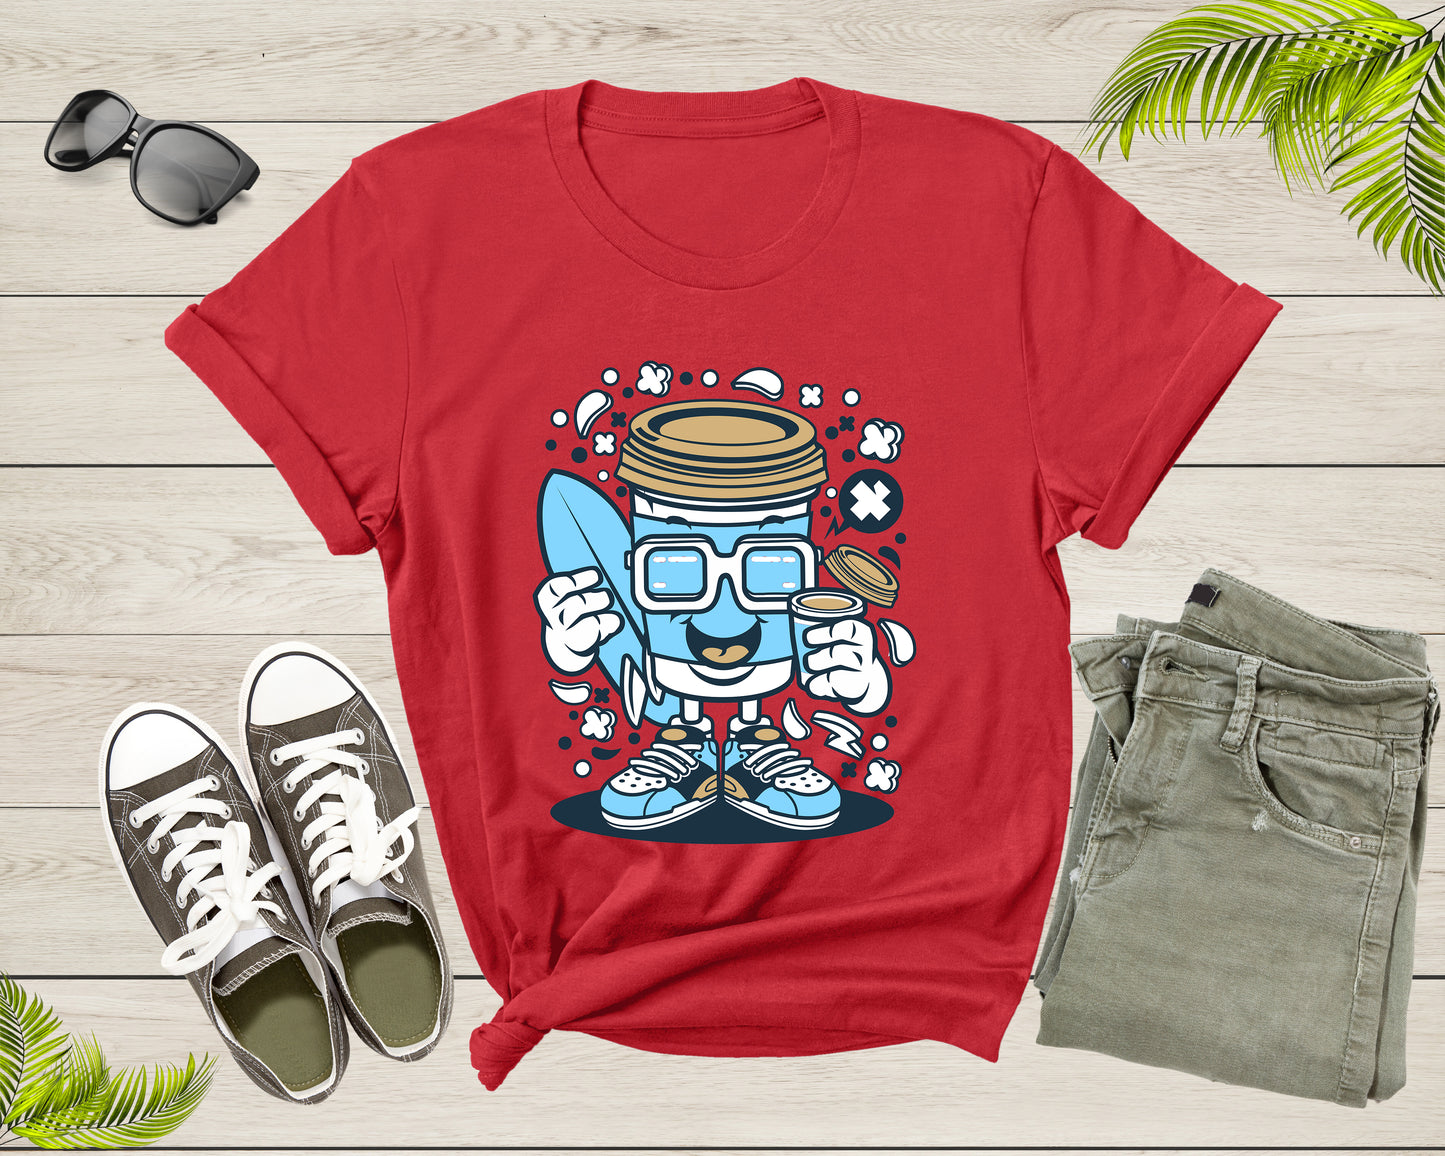 Happy Blue Coffee Cup Surfer with Sunglasses Holding Coffee T-Shirt Surf Coffee Lover Gift T Shirt for Men Women Kids Boys Girls Tshirt